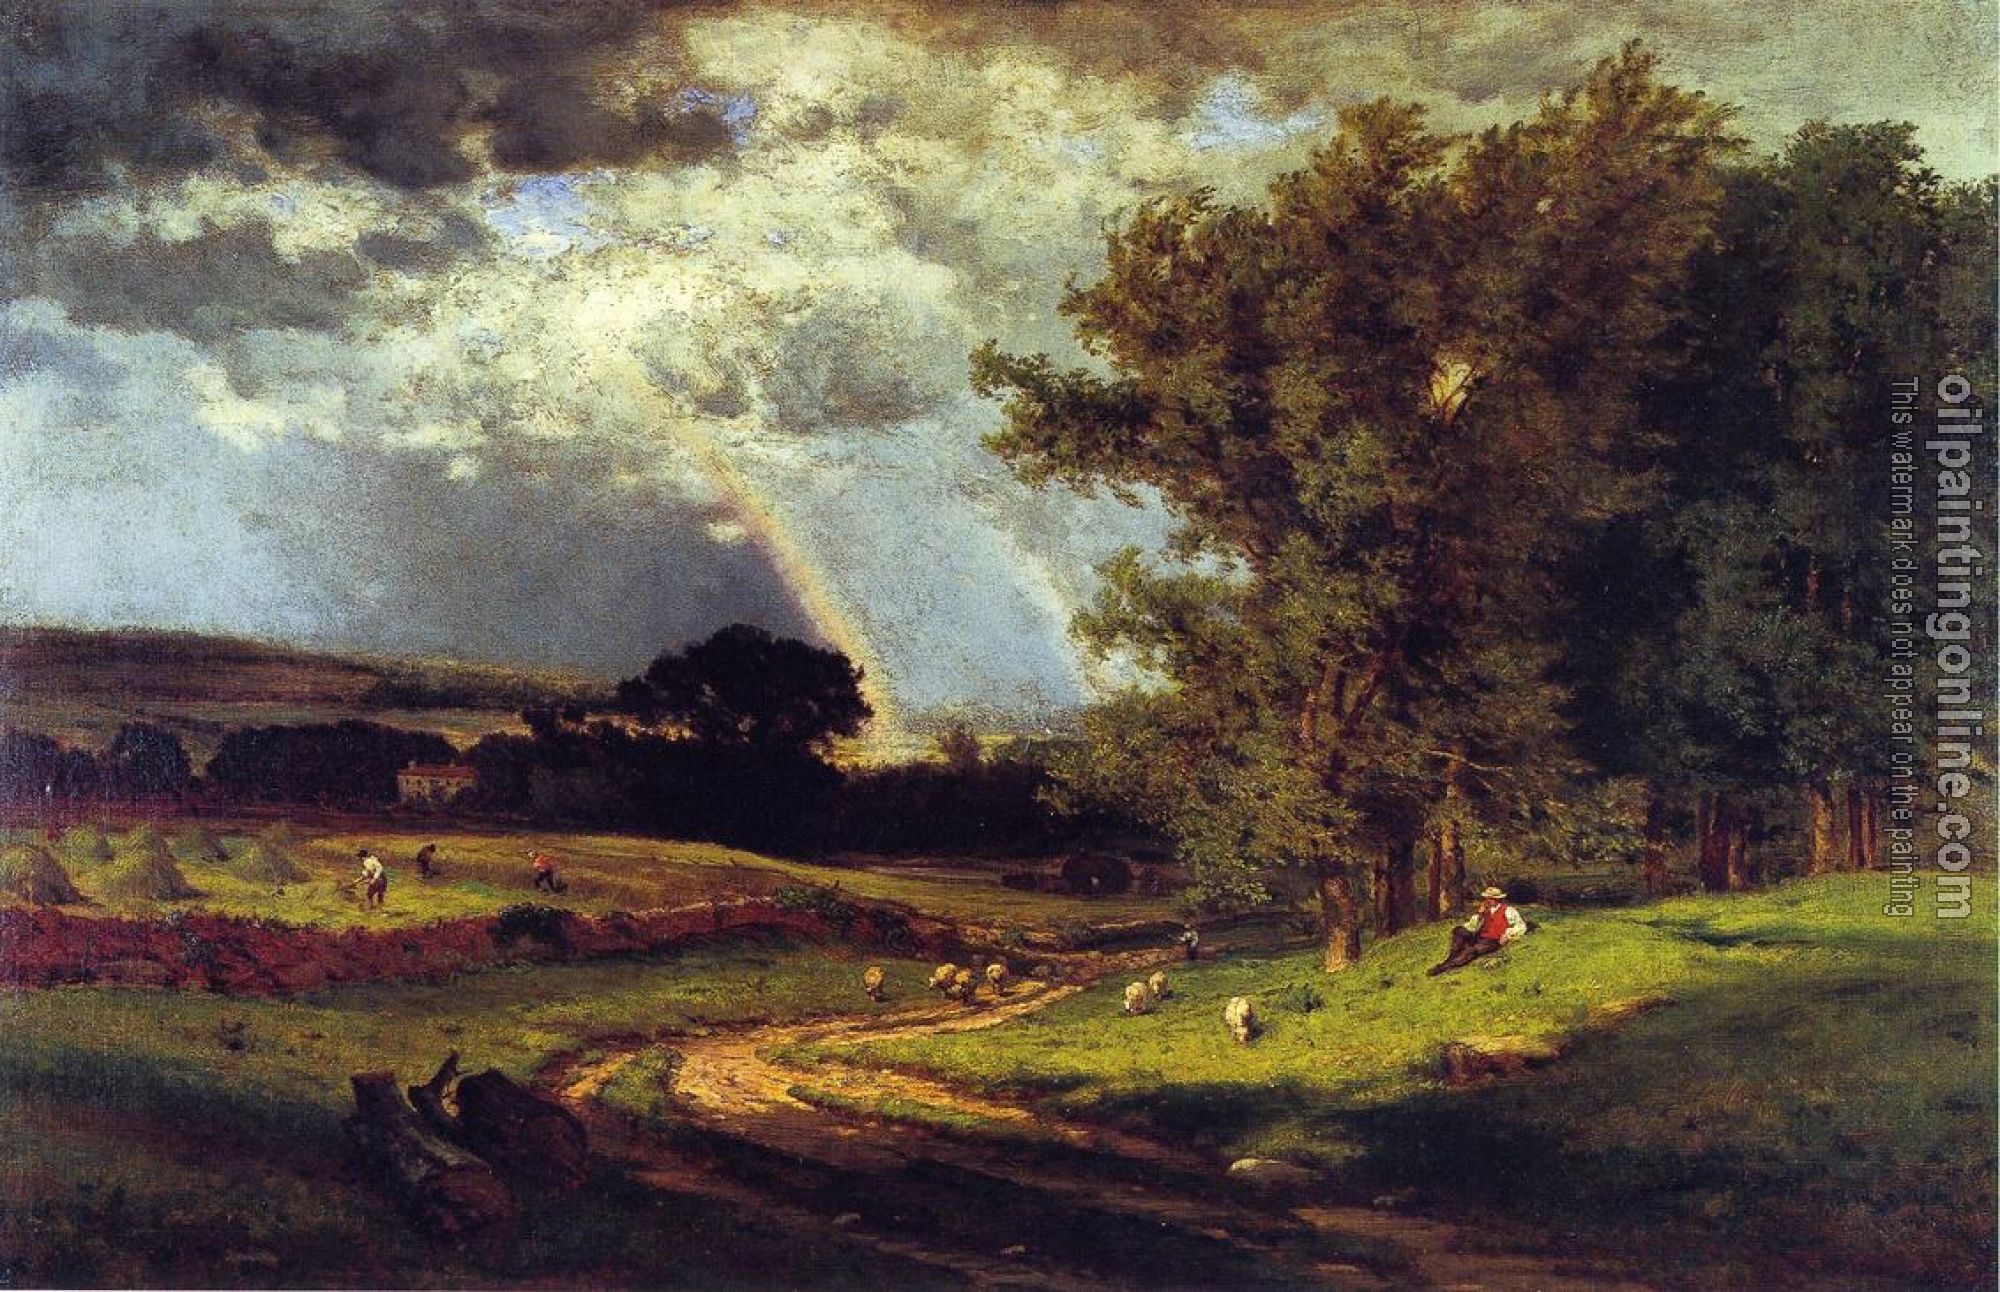 George Inness - A Passing Shower